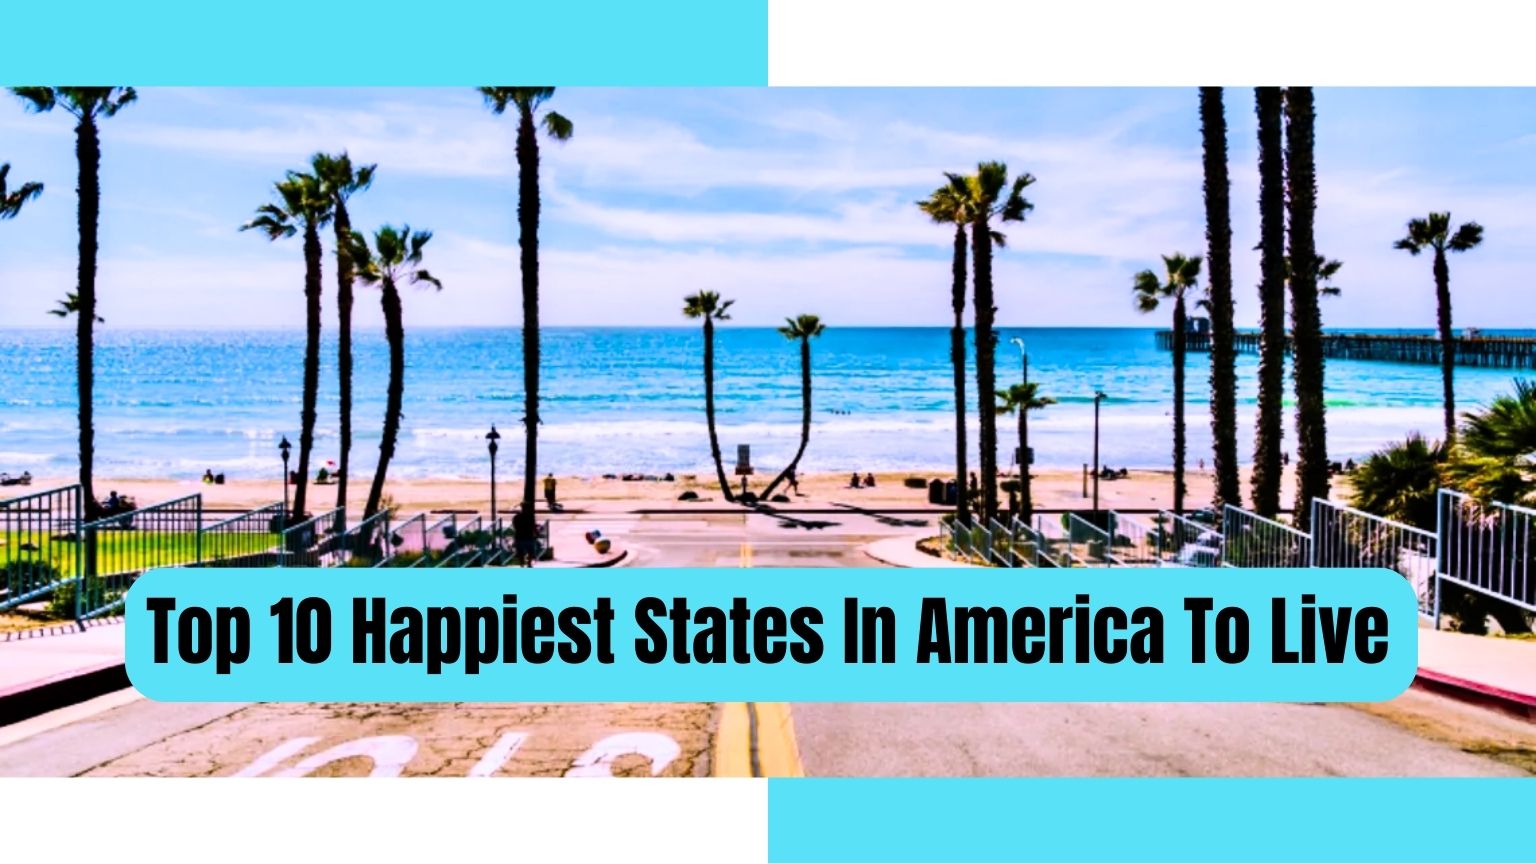 Top 10 happiest states in america to live, Happiest States In America, Top 10 happiest states in america,